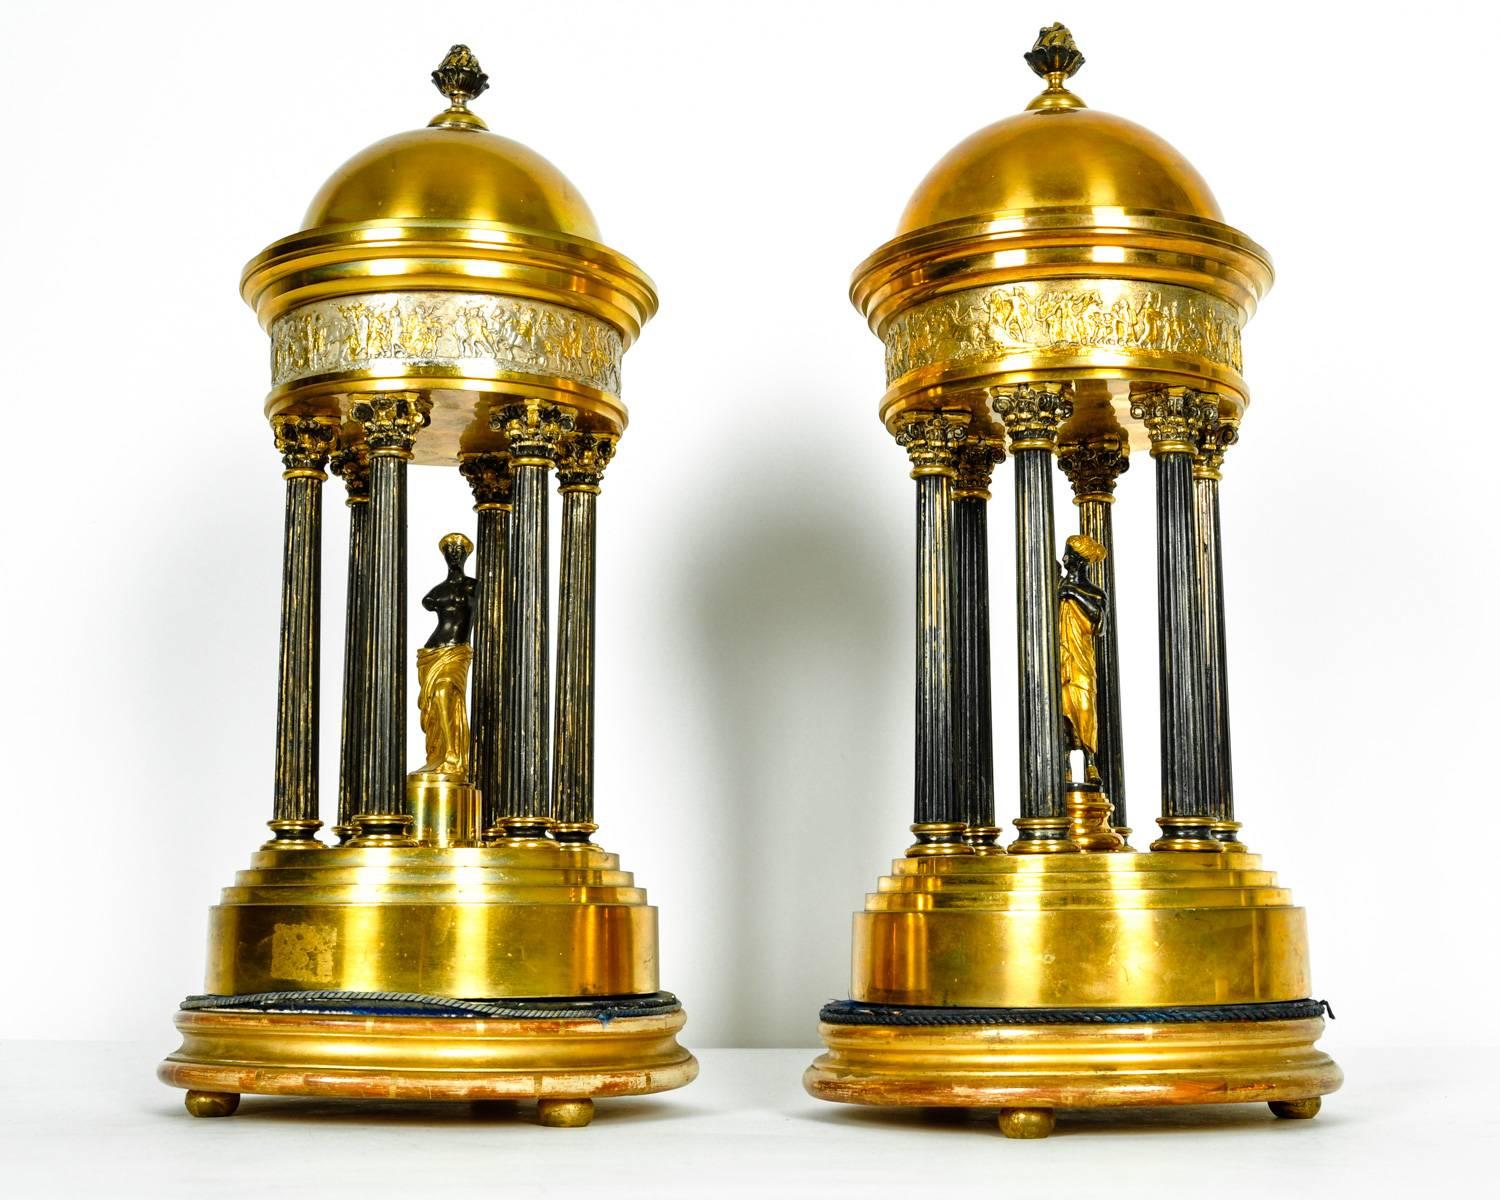 A very impressive pair of antique French bronze Greek dome with goddess sculpture. In excellent antique condition. Each piece measure 16 inches tall x 7.5 inches diameter.